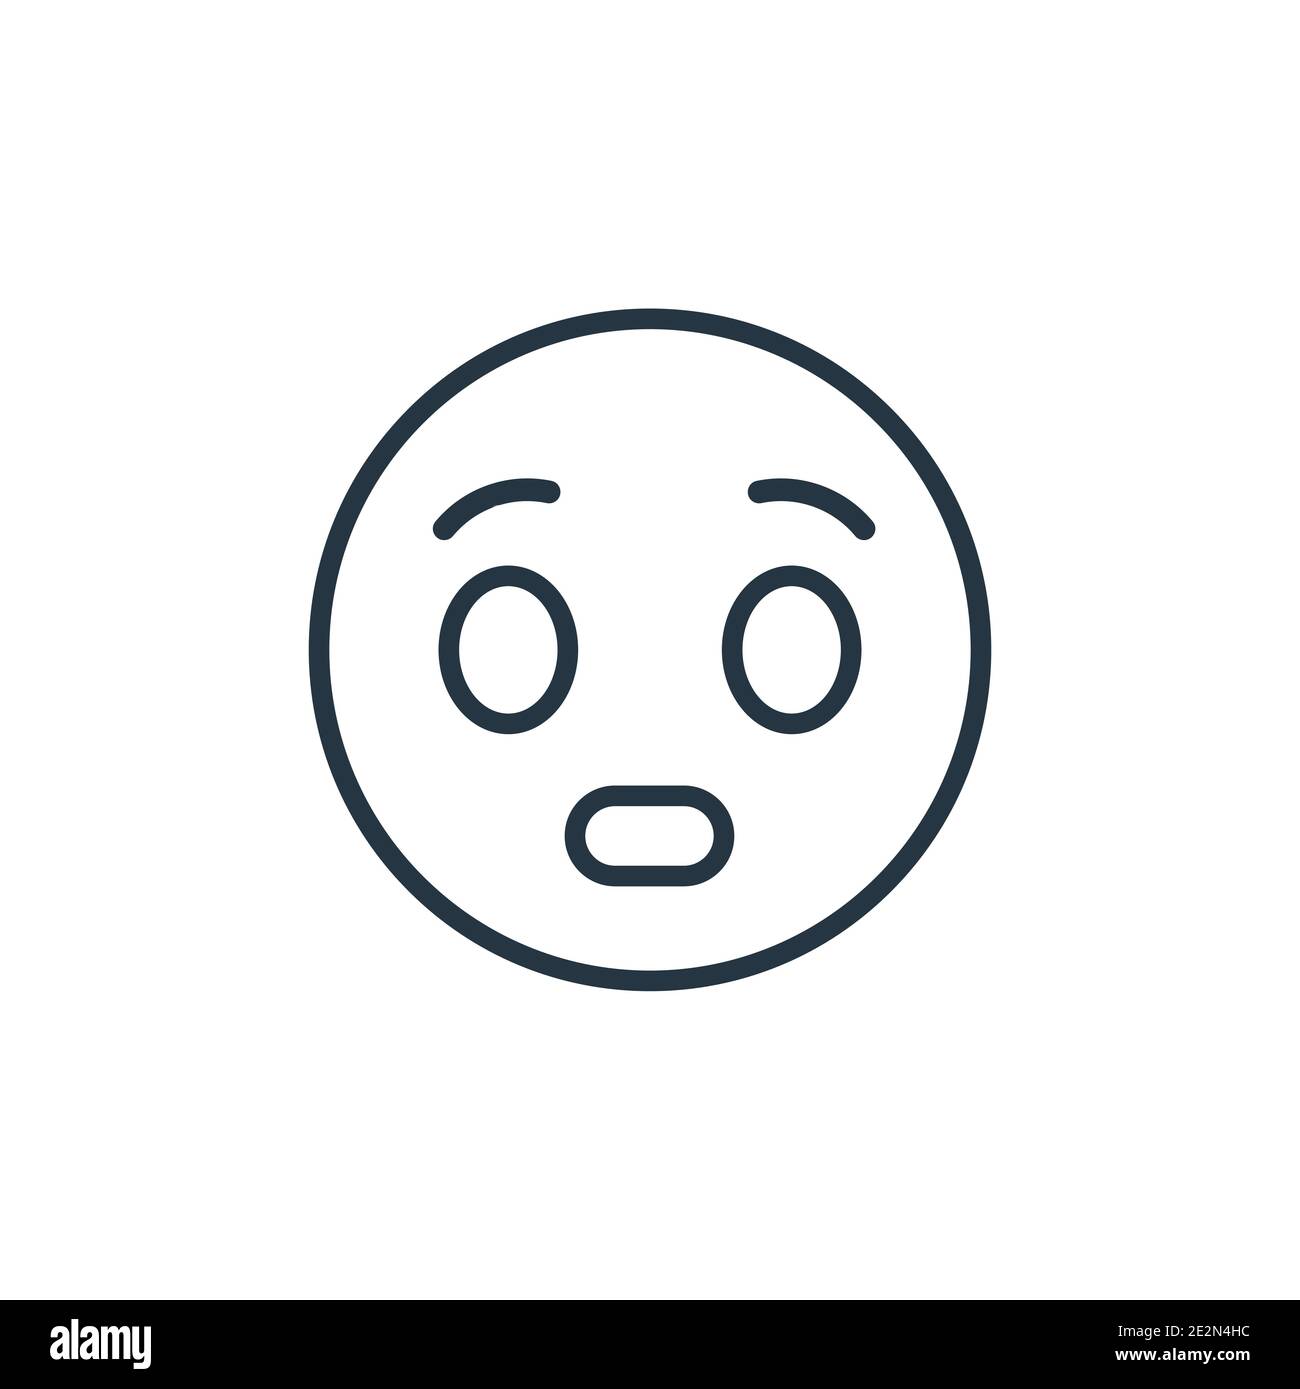 Cute Simple Outline Line Art Emoji Smiling With Hearts For Eyes On Isolated  White Background Stock Illustration - Download Image Now - iStock